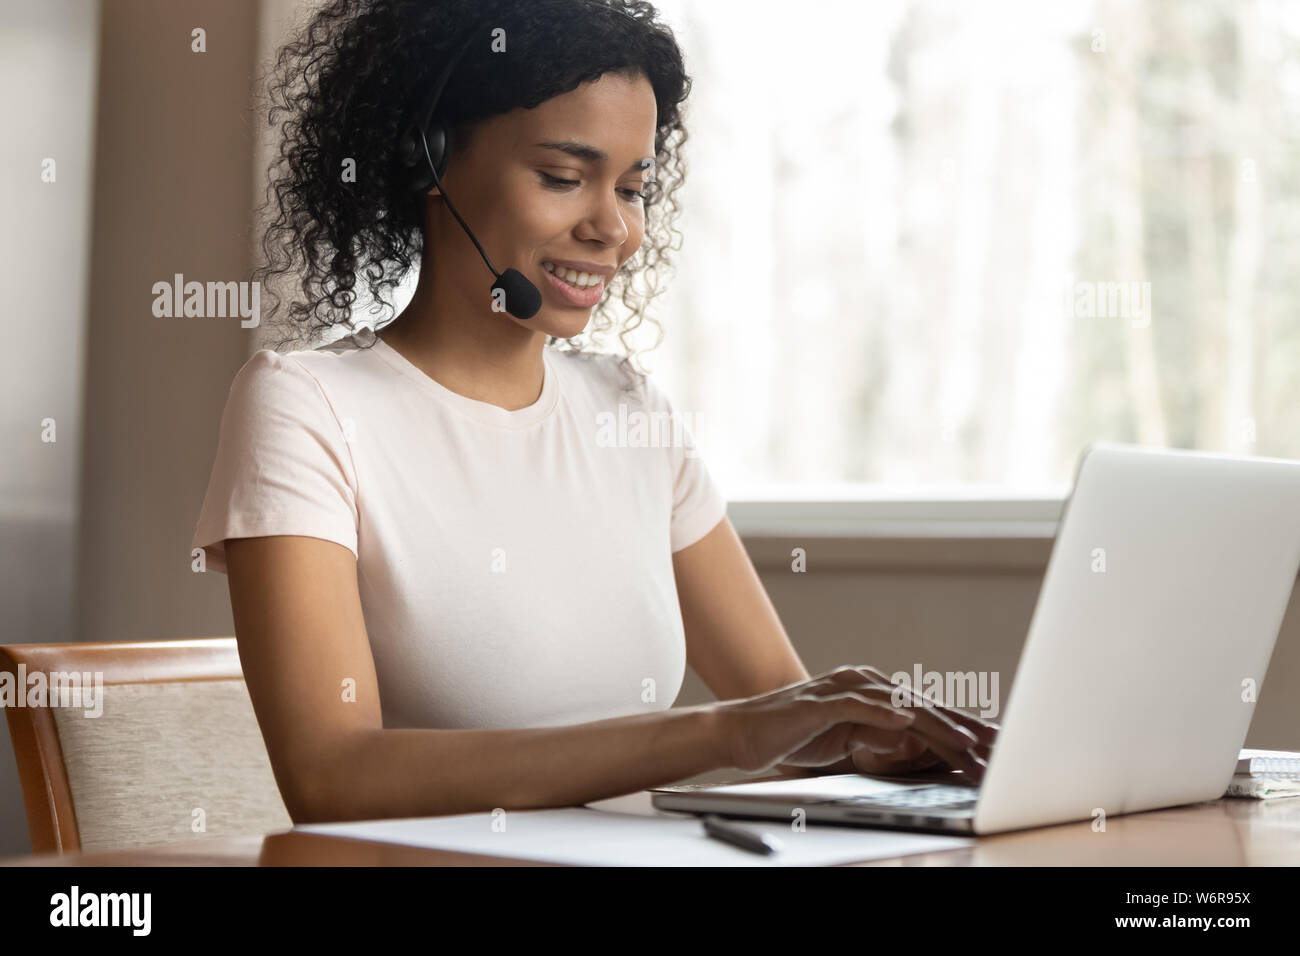 Young mixed race woman wearing headphones typing on computer Stock Photo